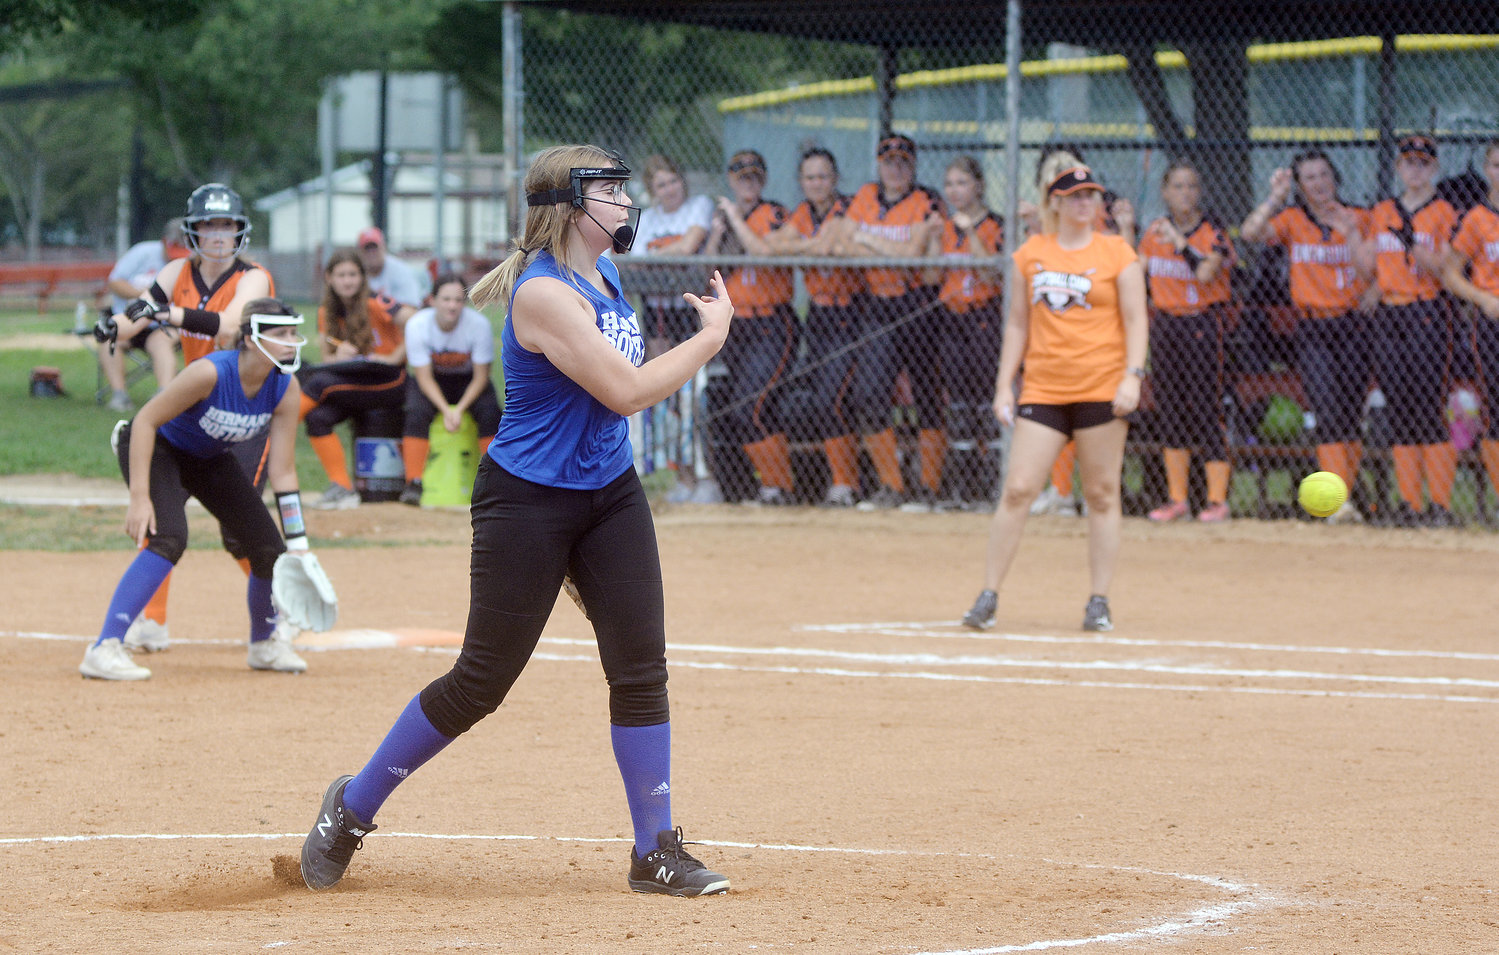 Madison Holliday (center) lets a pitch fly with the Owensville Dutchgirl dugout in the background during preseason jamboree action at Nelson Hart Park in St. James Saturday morning.